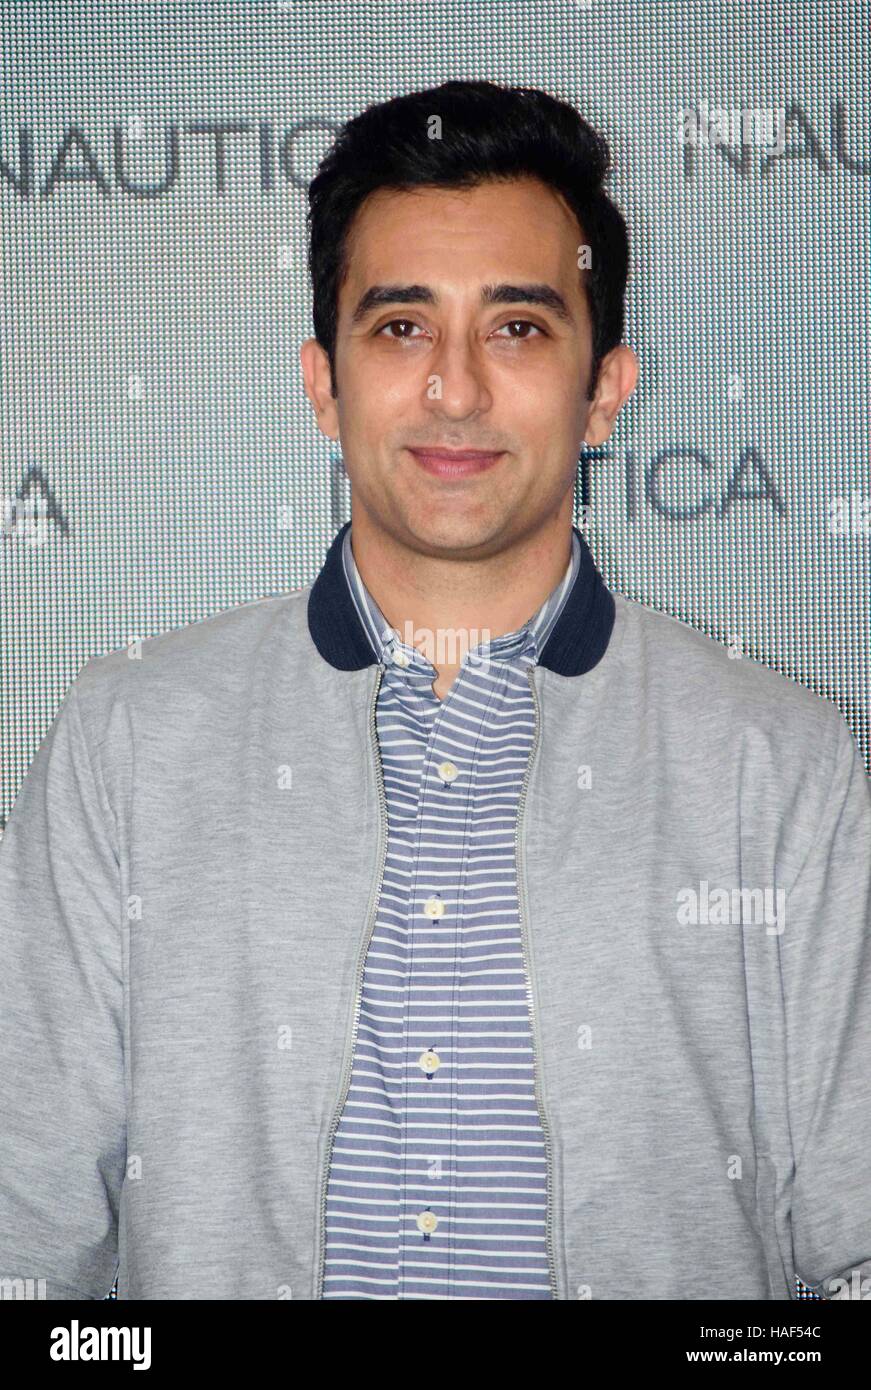 Bollywood actor Rahul Khanna during the launch of Fall 2016 Collection by lifestyle brand,Nautica in Mumbai Stock Photo